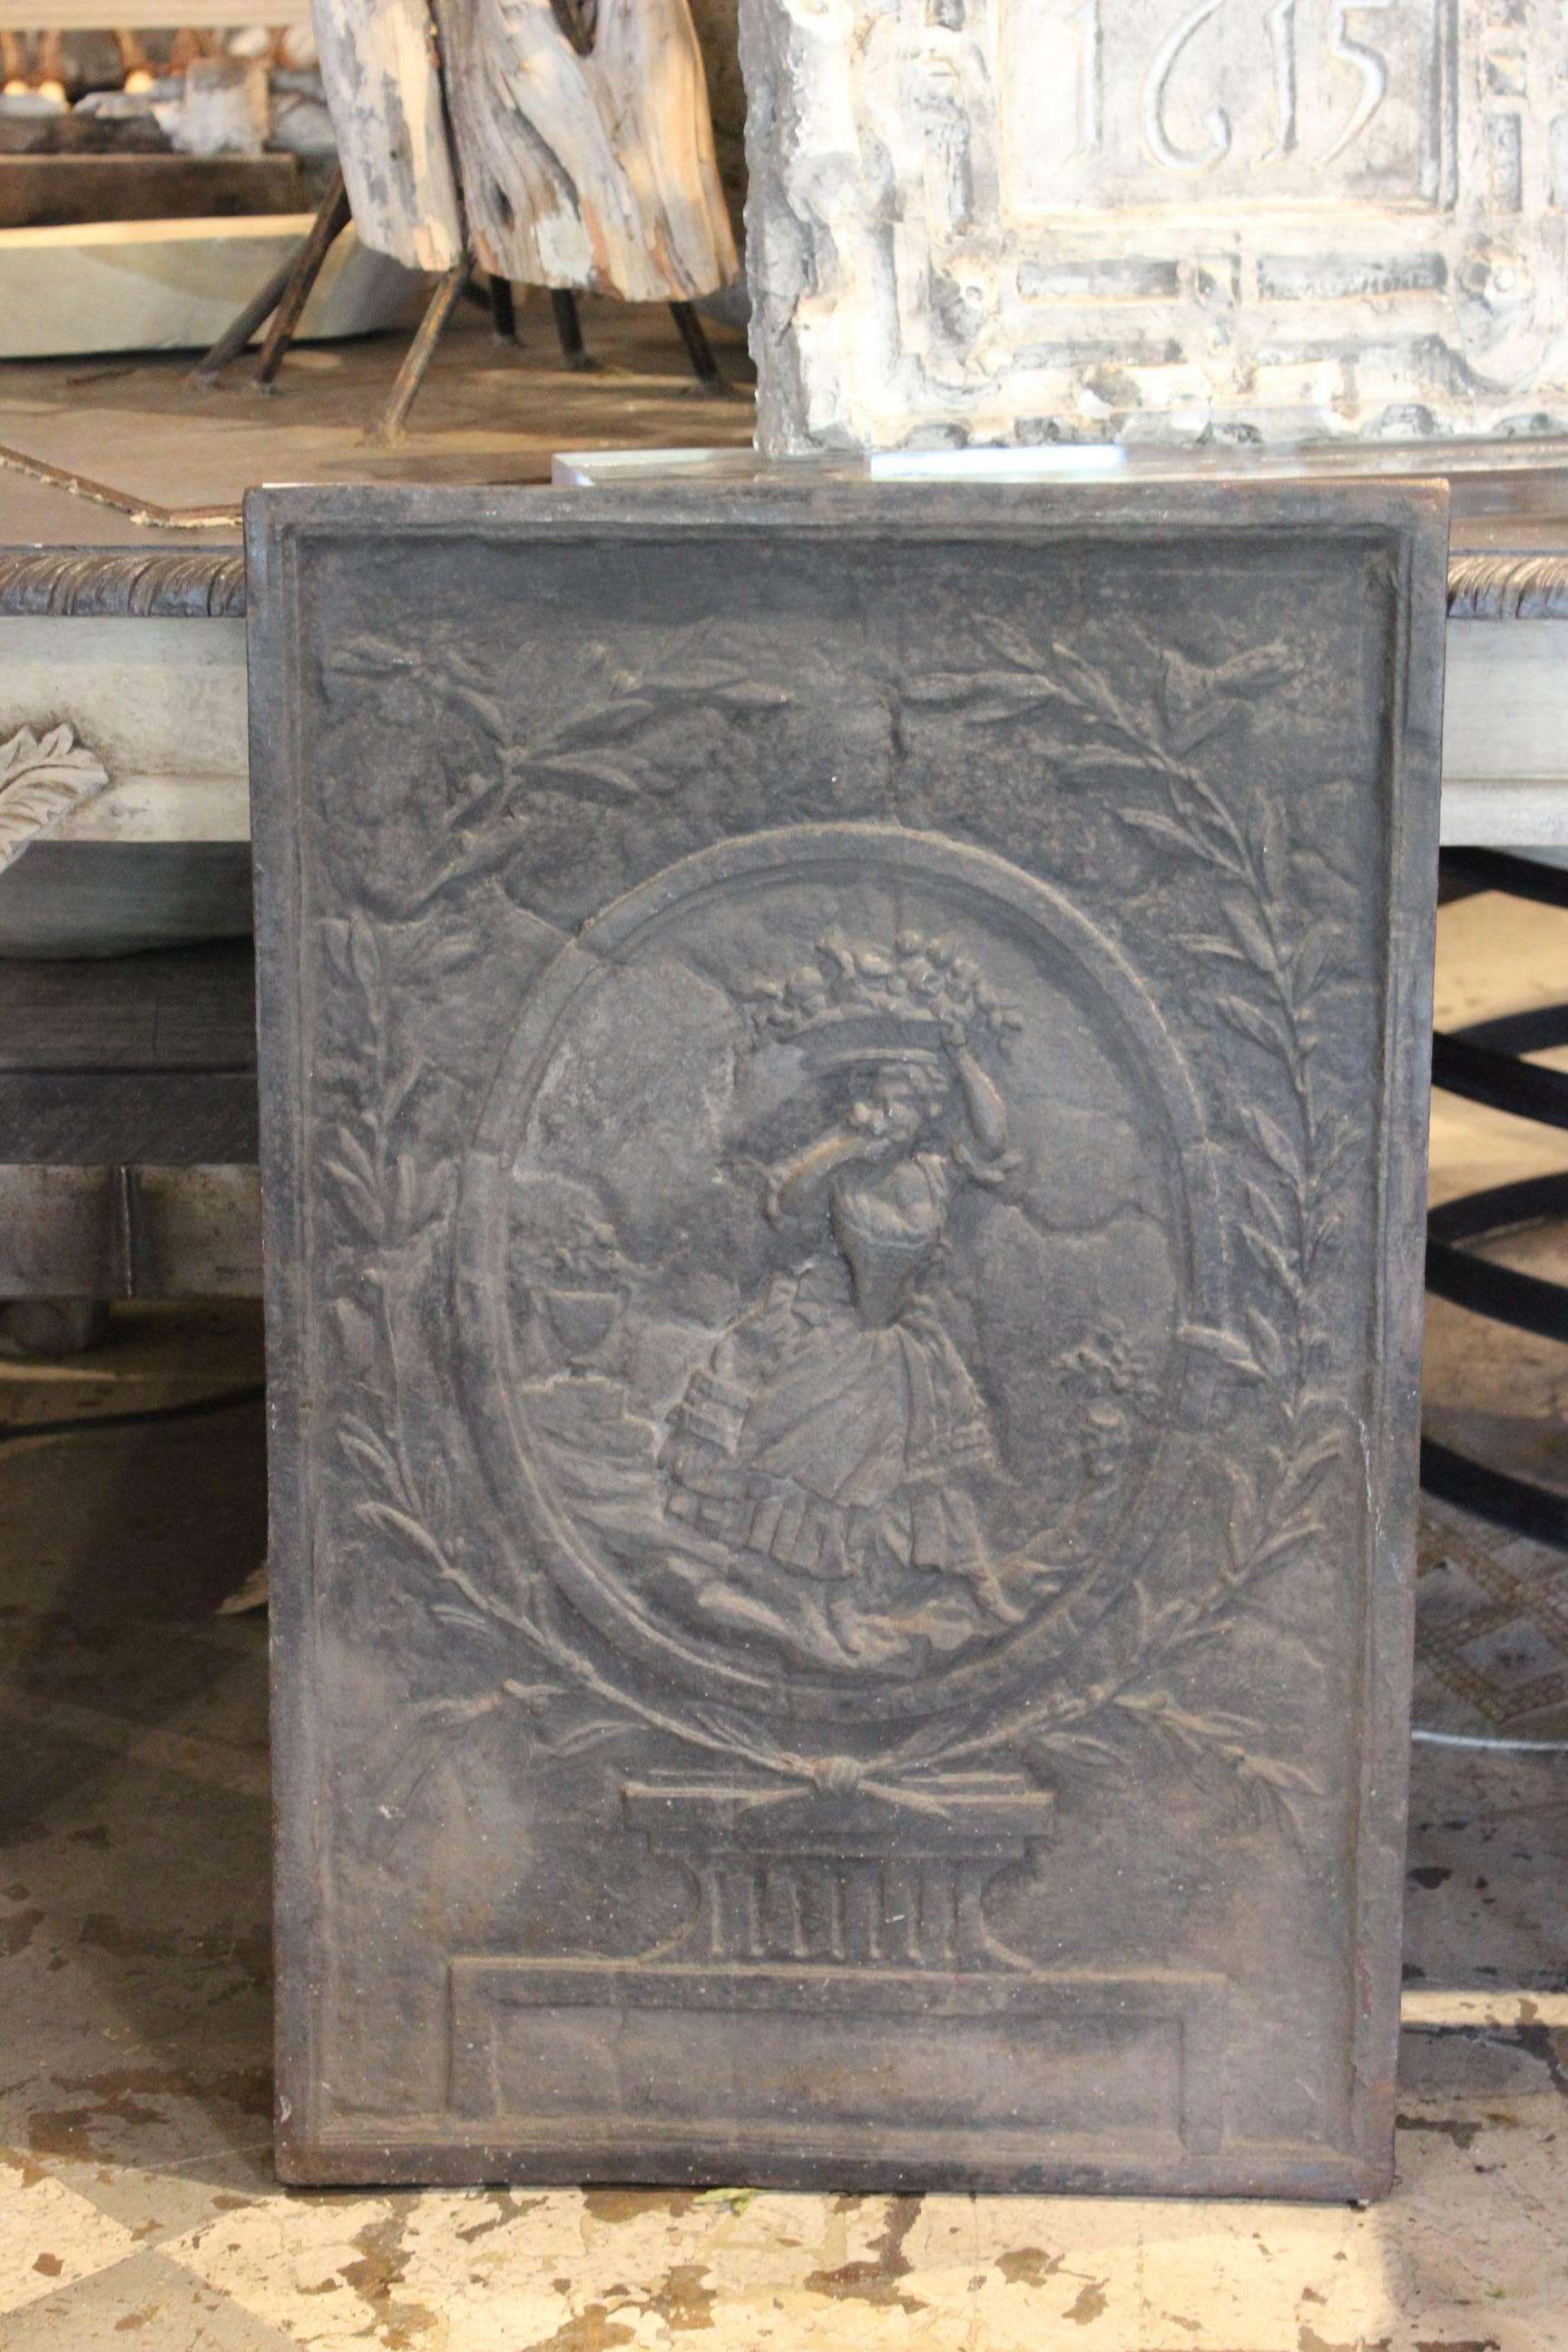 Discovered during our recent time in Chartres, France we love this large-scale iron fireplace screen. Crafted in iron, the relief depicts a beautiful French girl with laurel leaf detail. Lovely used in the fireplace but also would be very nice